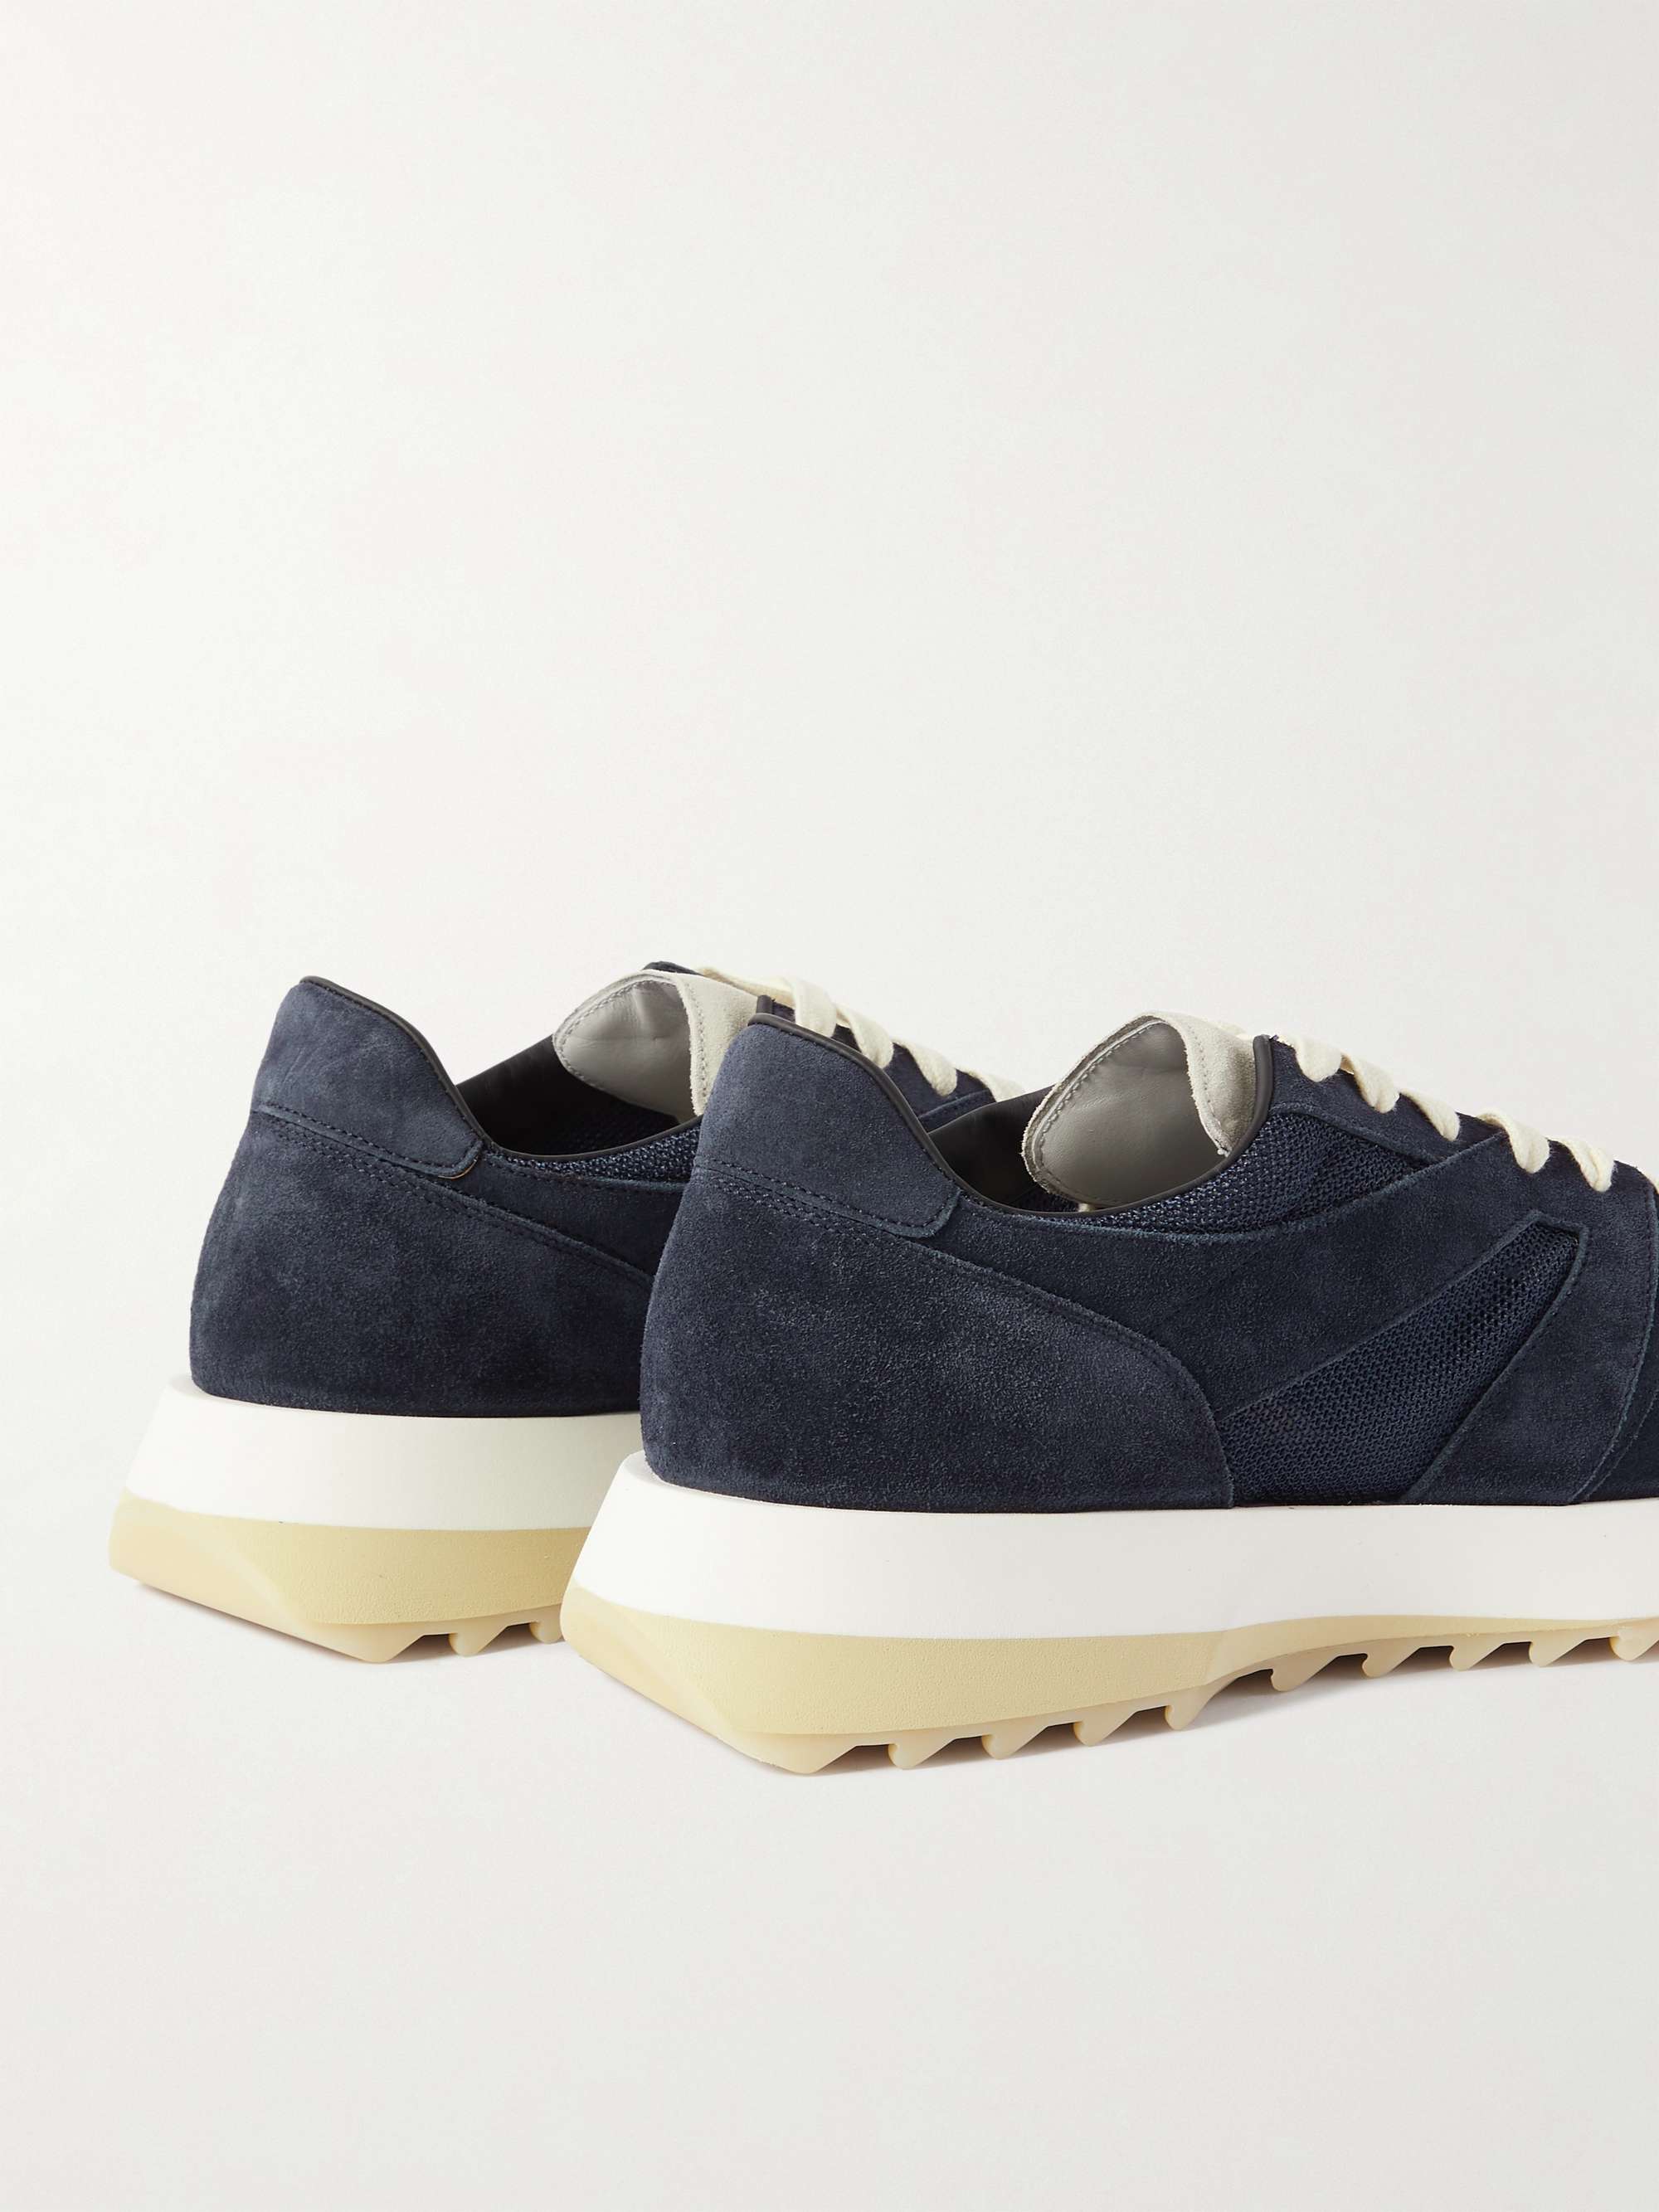 FEAR OF GOD Panelled Suede and Mesh Sneakers